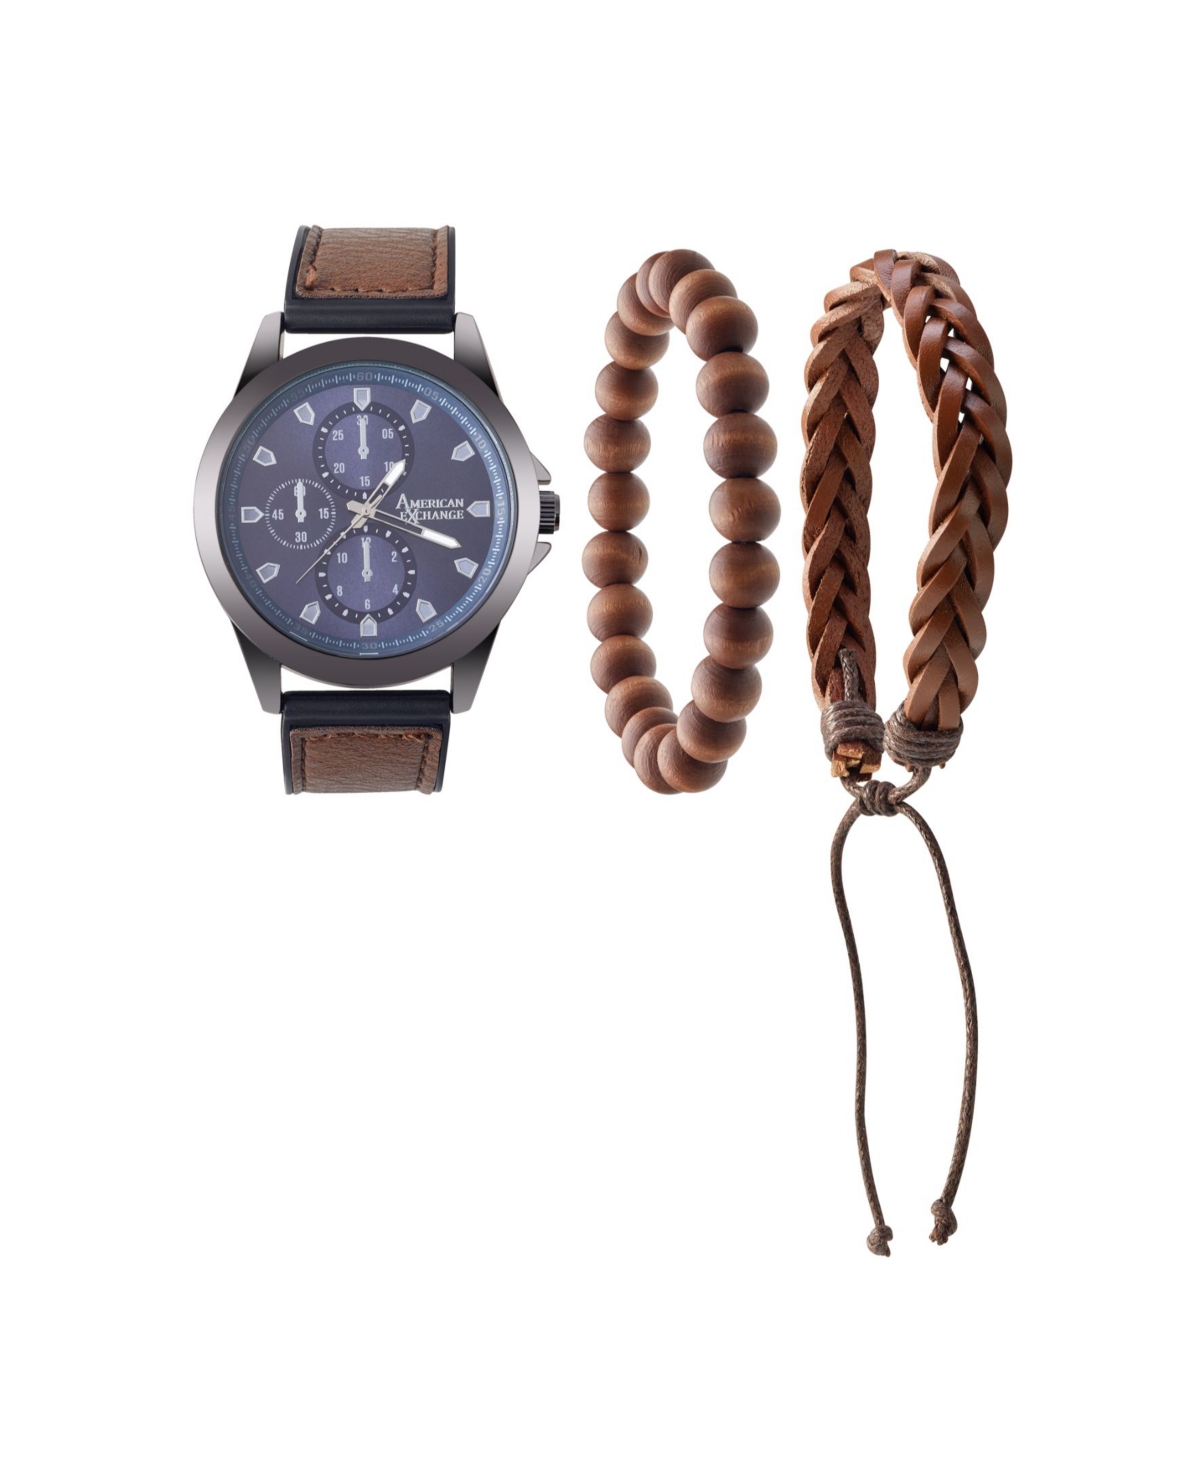 Men's Quartz Movement Brown Leather Analog Watch, 47mm and Stackable Bracelet Set with Zippered Pouch - Brown, Matte Black